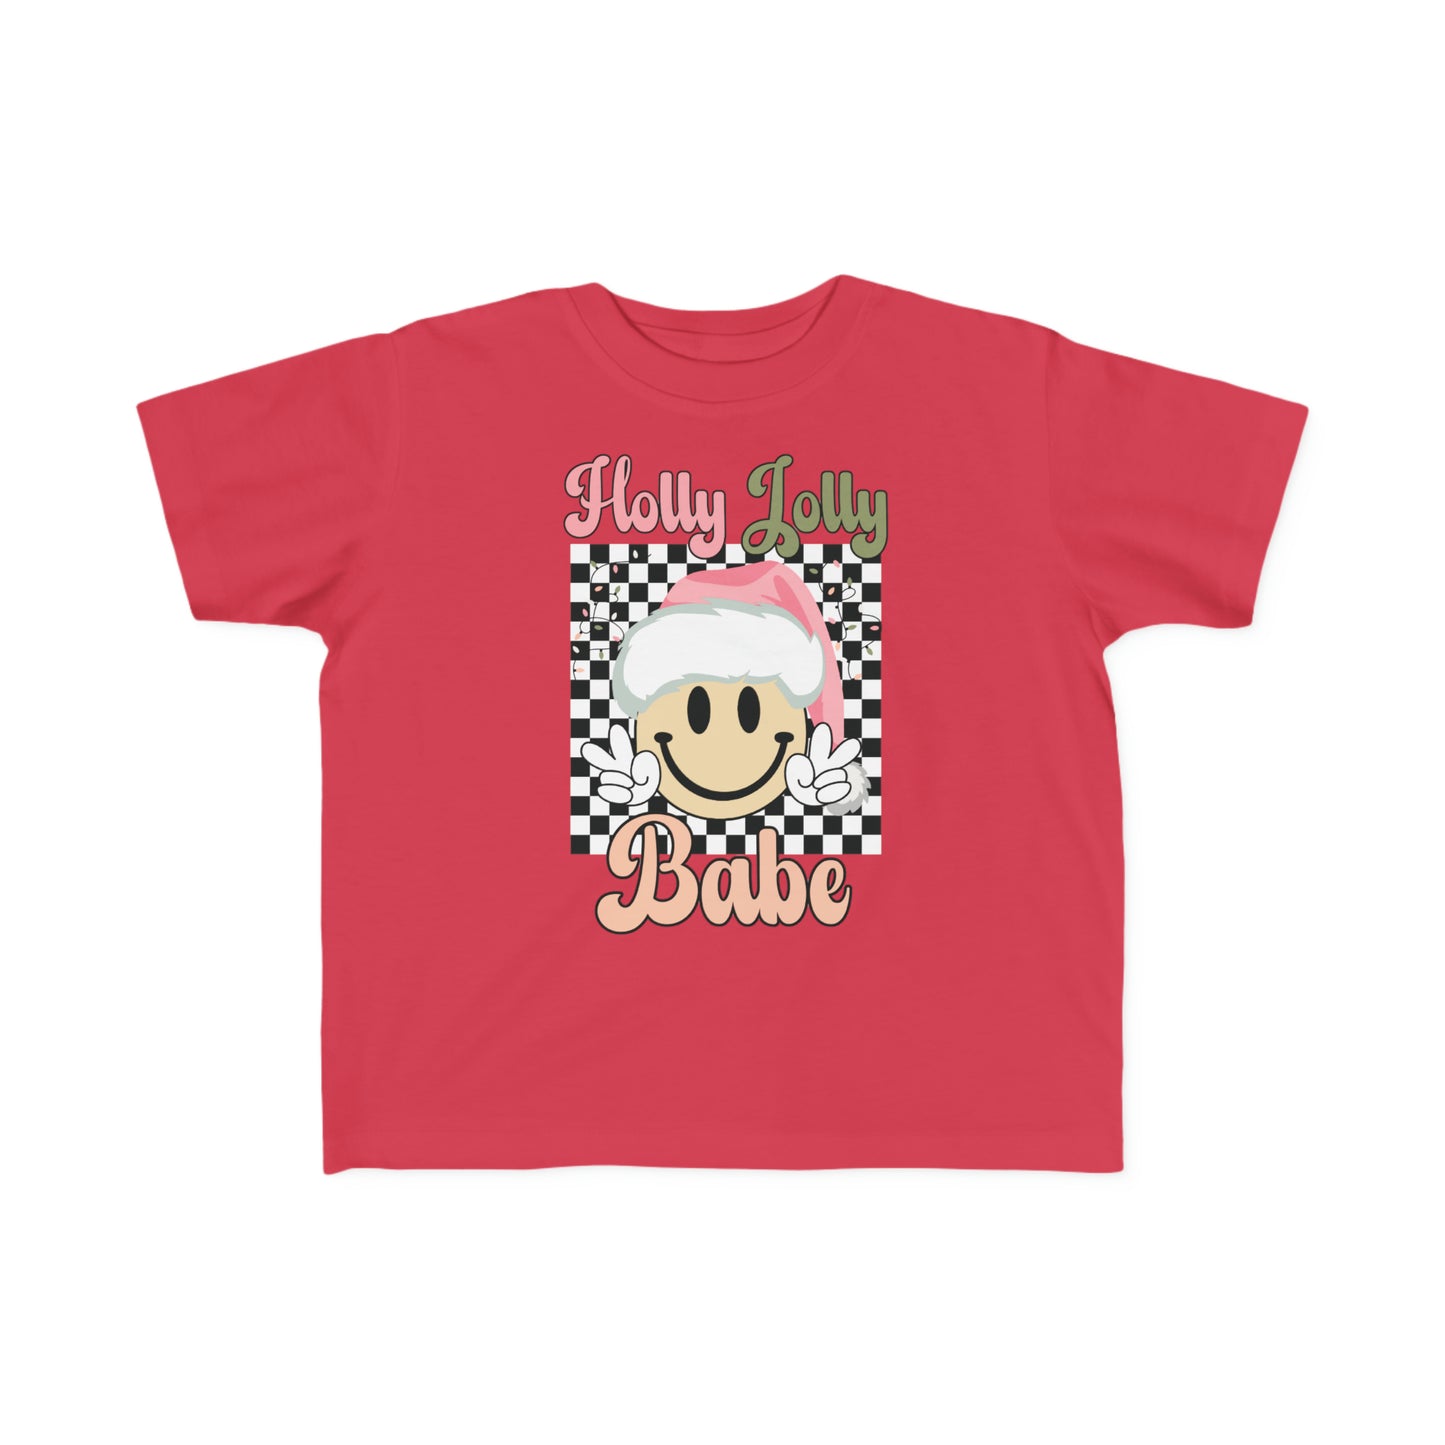 Holly Jolly Babe Christmas Toddler's Fine Jersey Tee